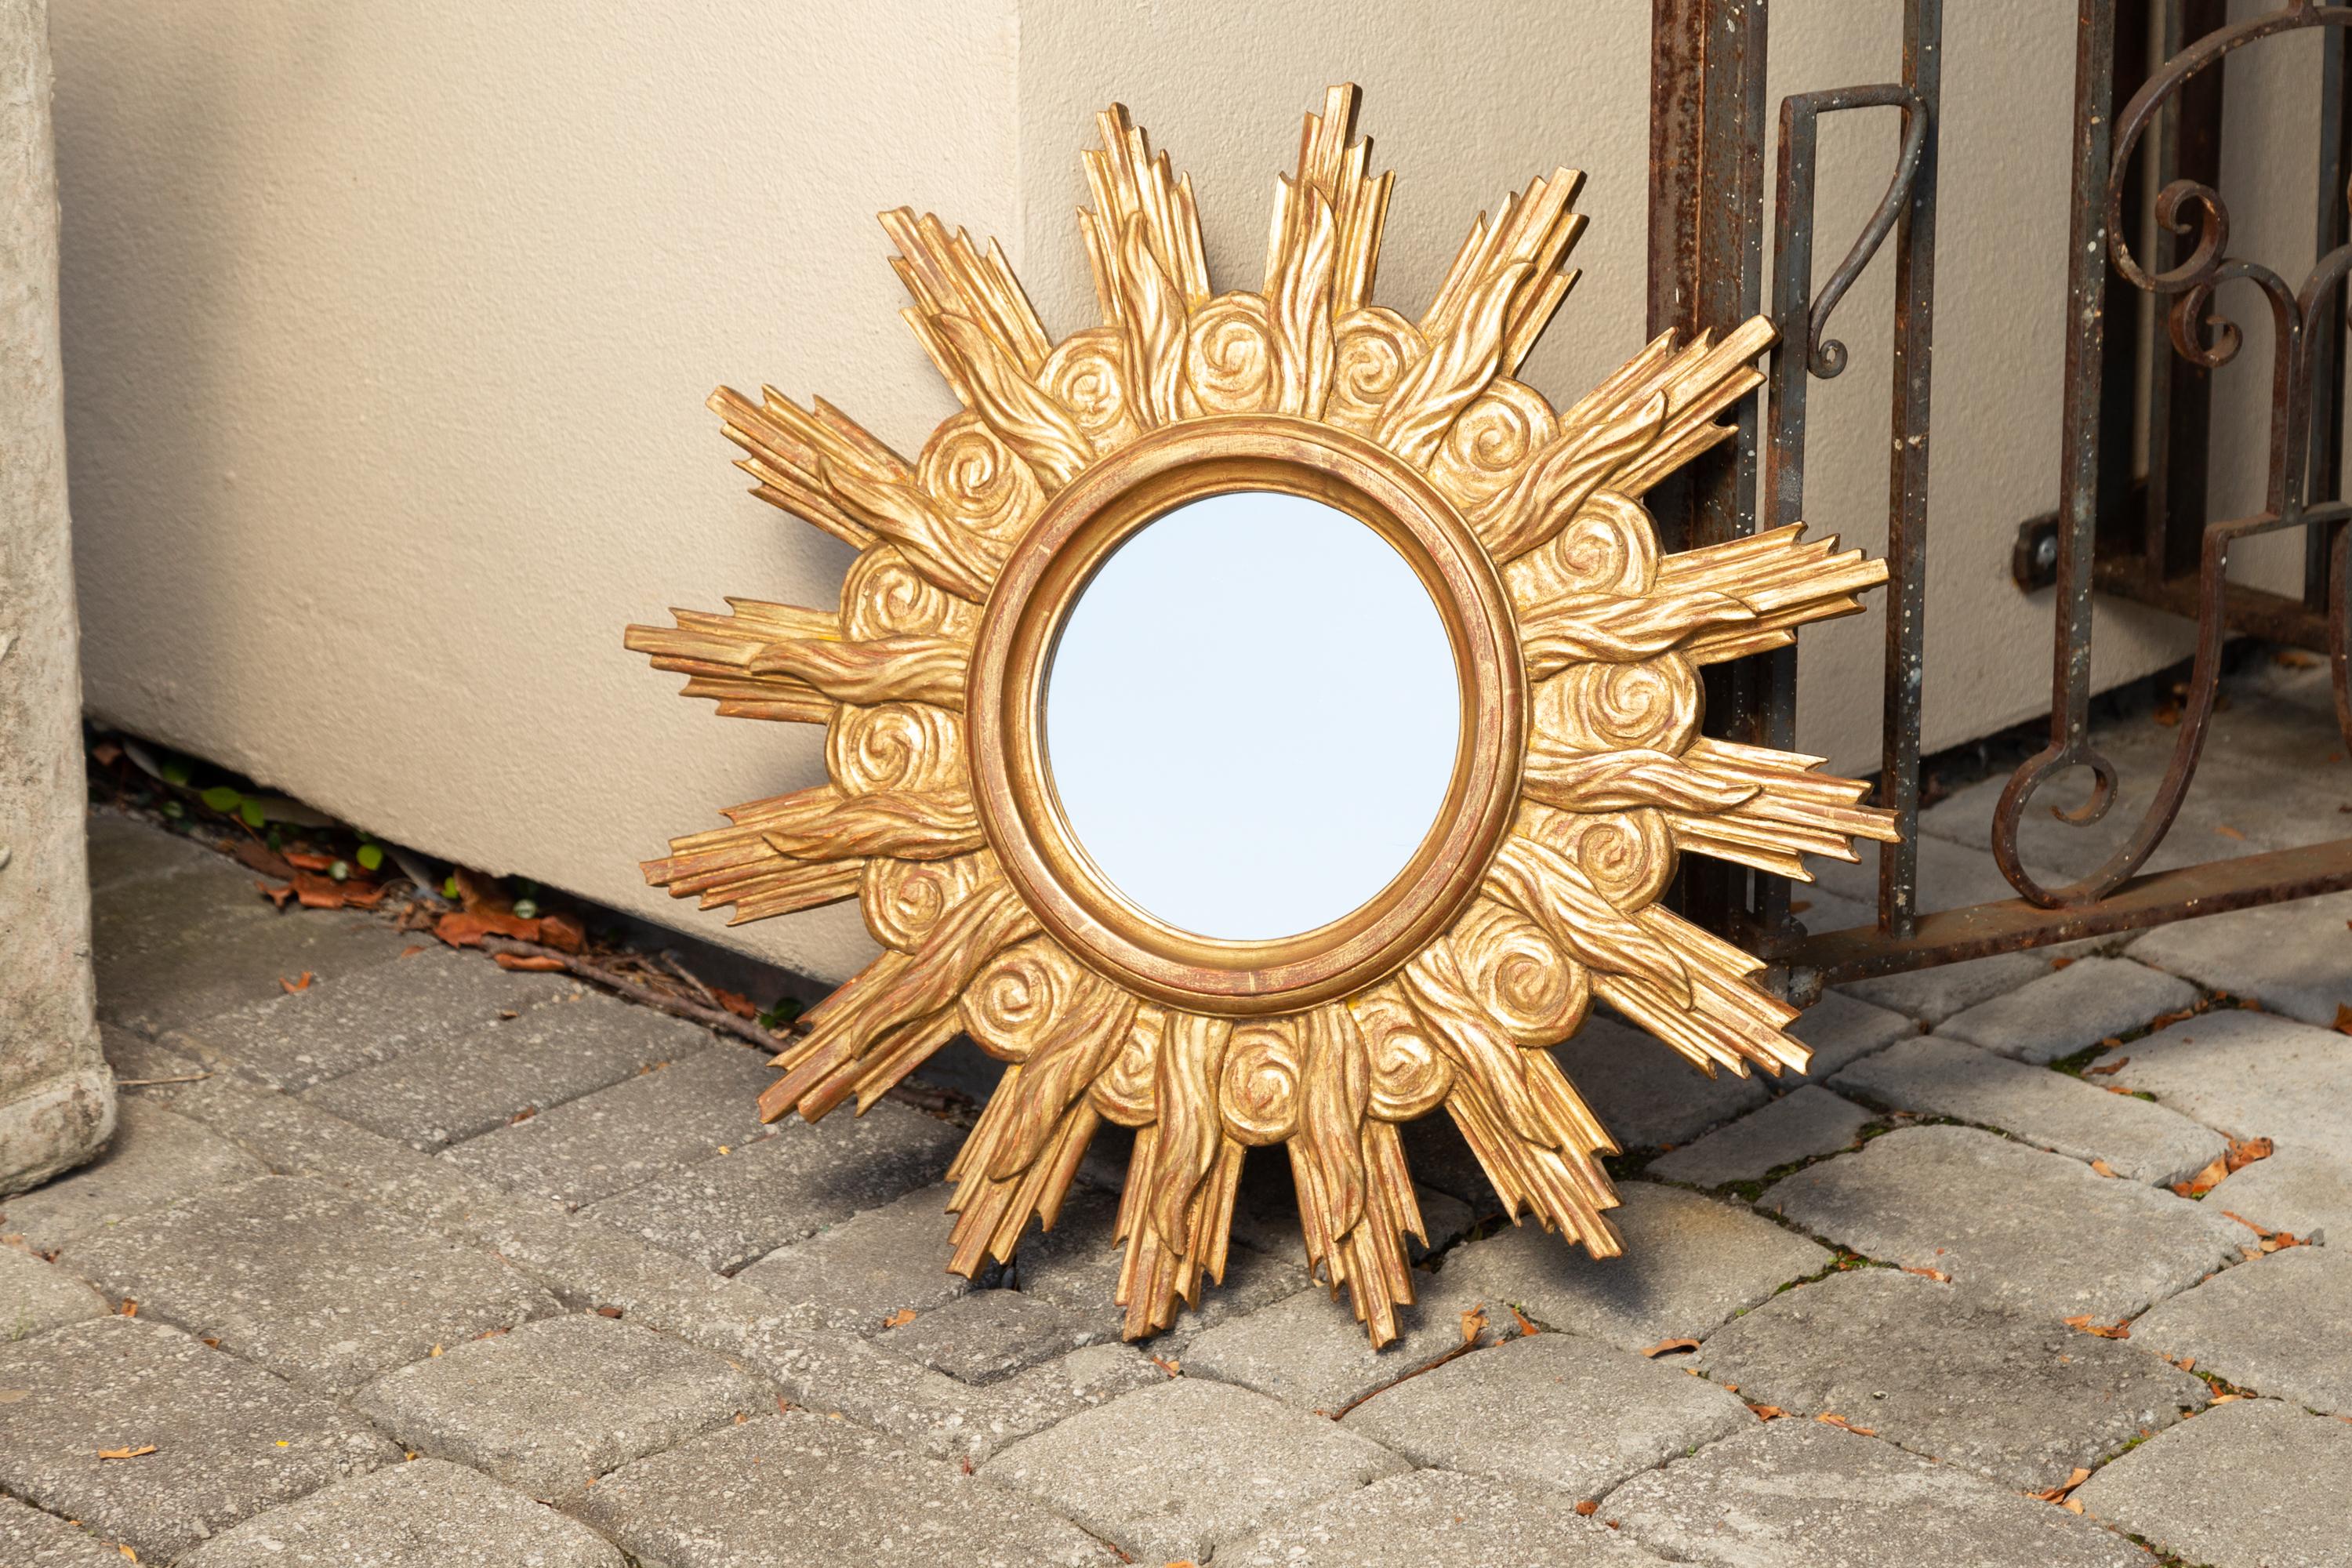 A vintage French carved giltwood sunburst mirror from the mid-20th century, with cloudy motifs and rays of varying sizes. Born during the midcentury period, this French sunburst mirror features a circular flat mirror plate, surrounded by an